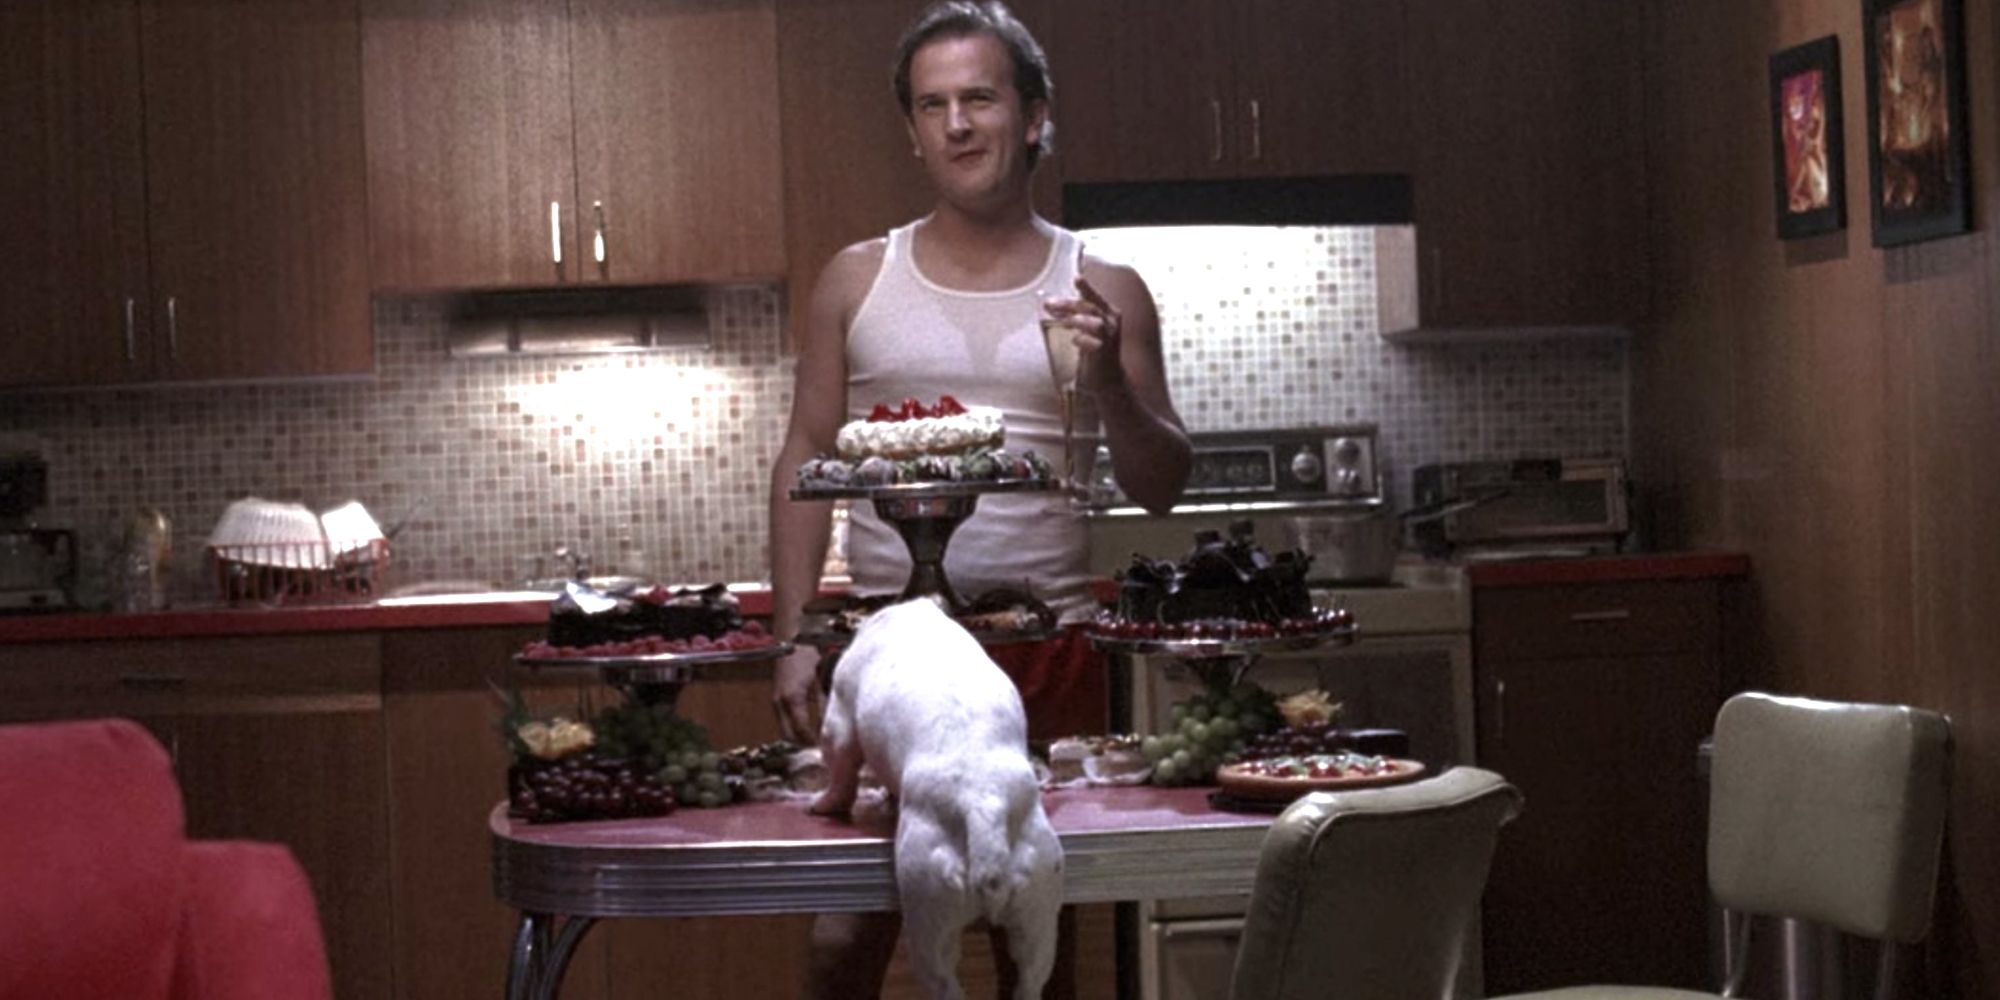 Image of the Trickster/Gabriel in his underwear eating a banquet of food with a dog